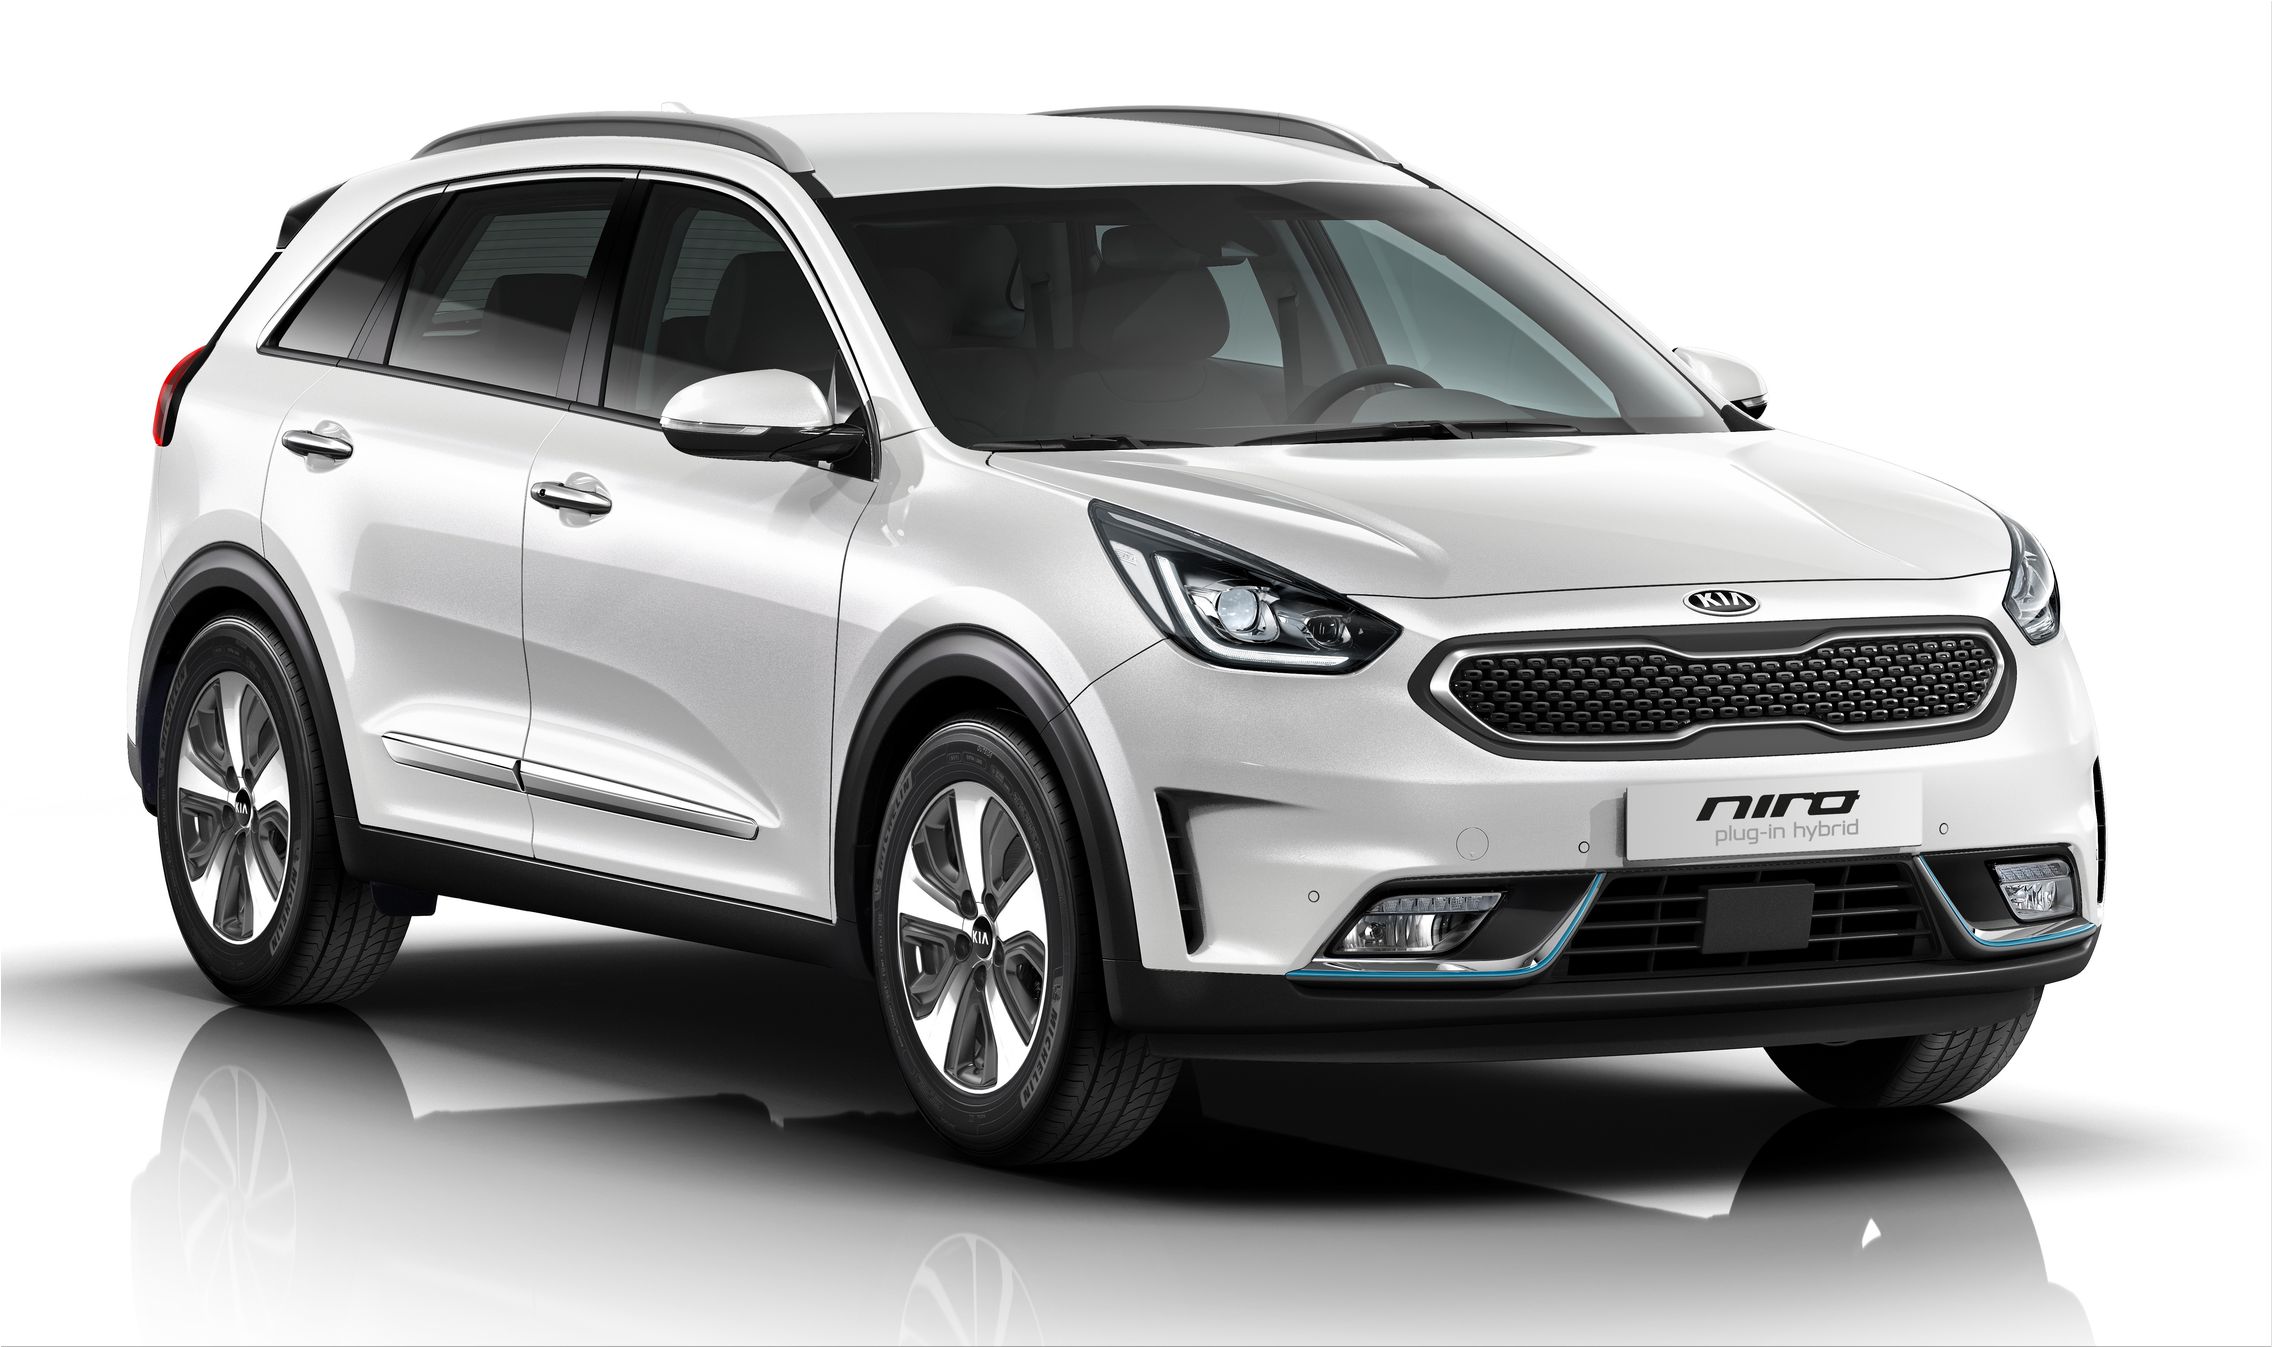 new-versions-of-kia-niro-hybrid-and-plug-in-hybrid-can-be-ordered-now